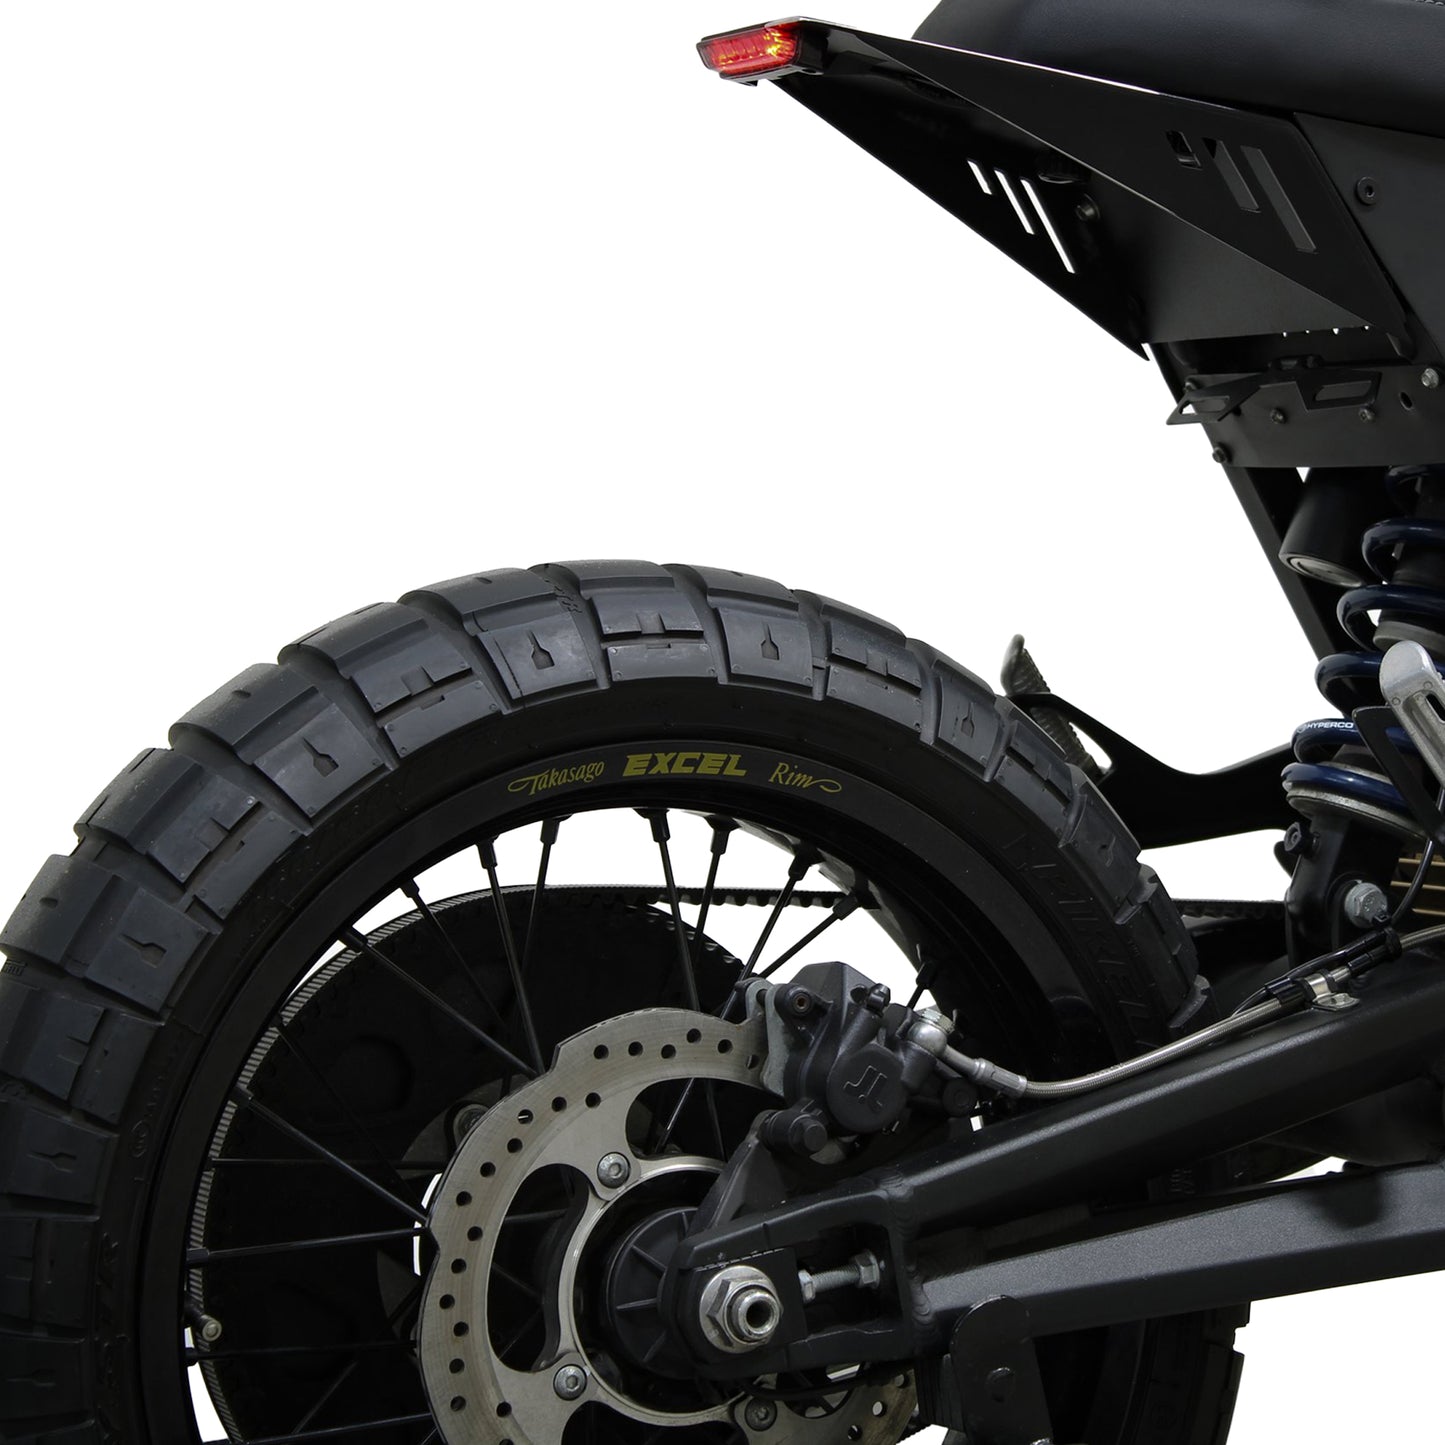 Droog E-Fighter Ultraligero Electric Motorcycle